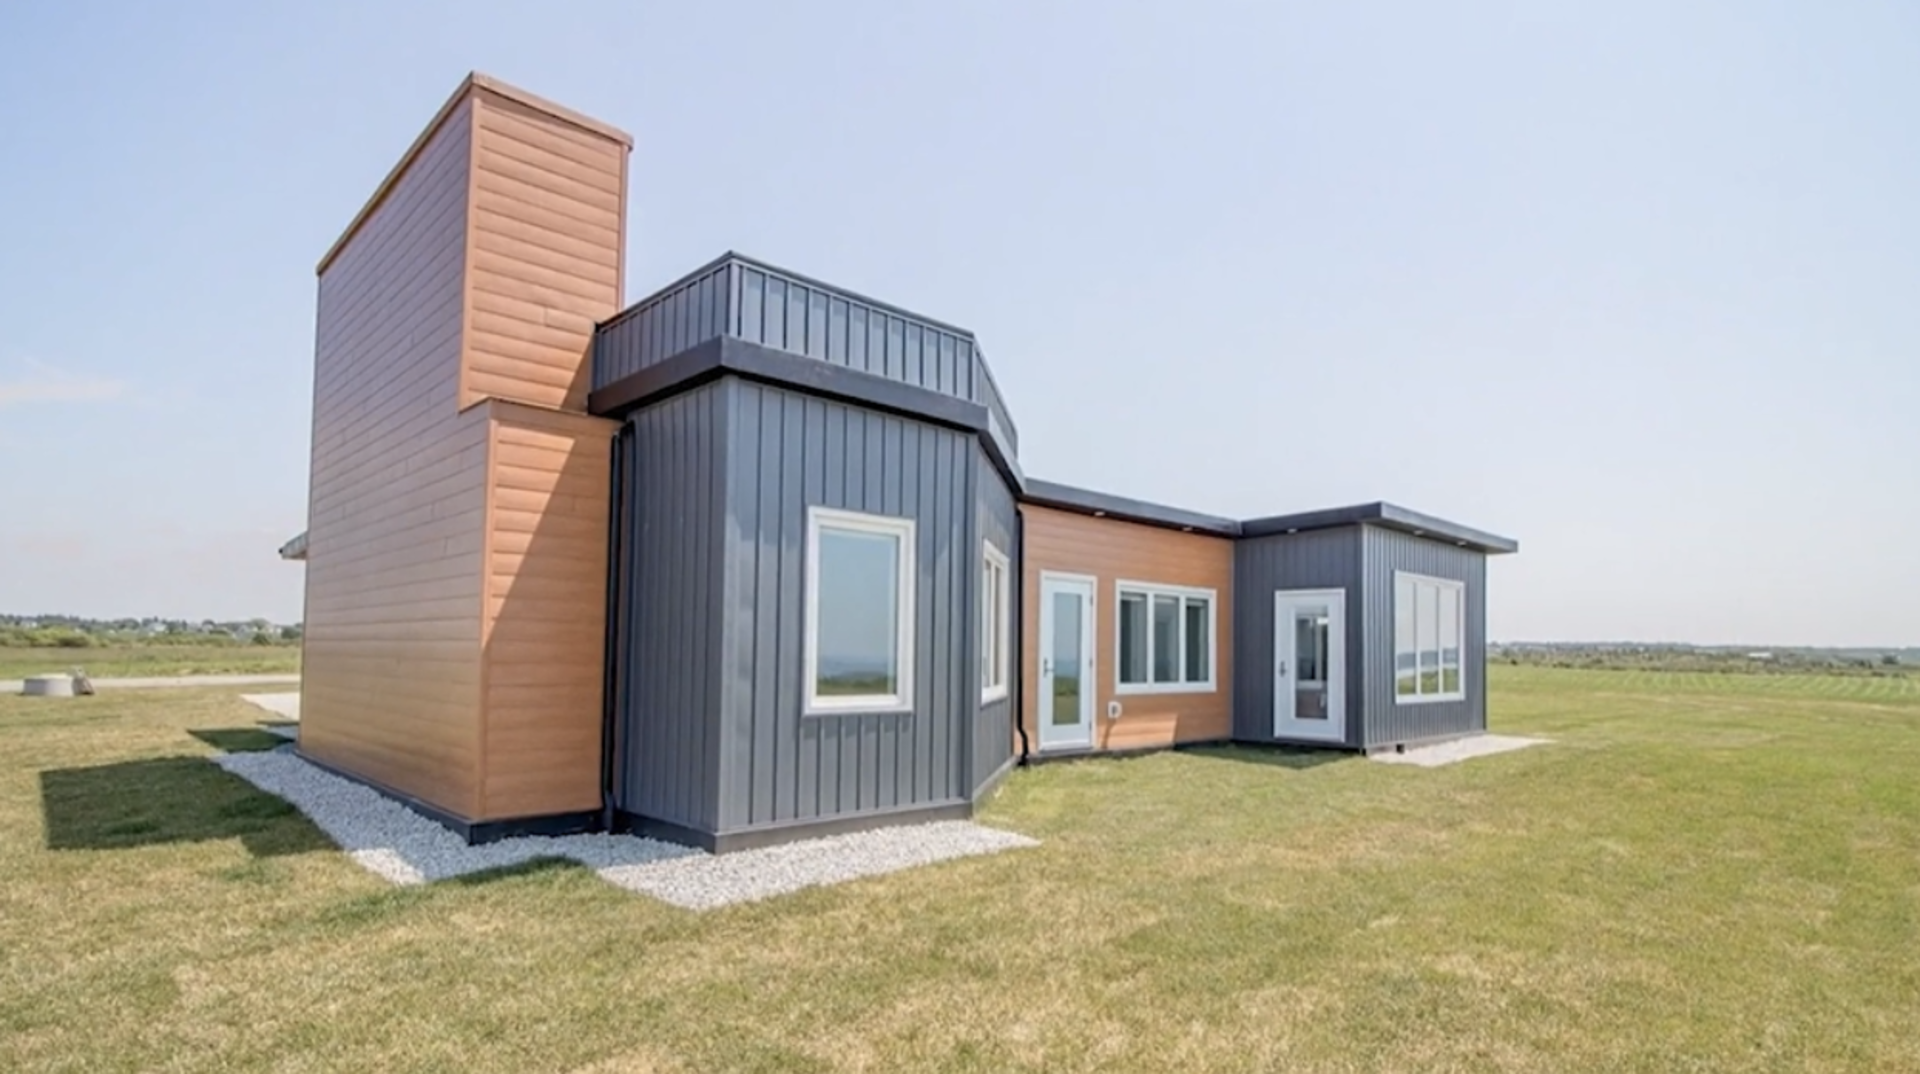 Plastic homes: These could solve our housing shortage and waste problem